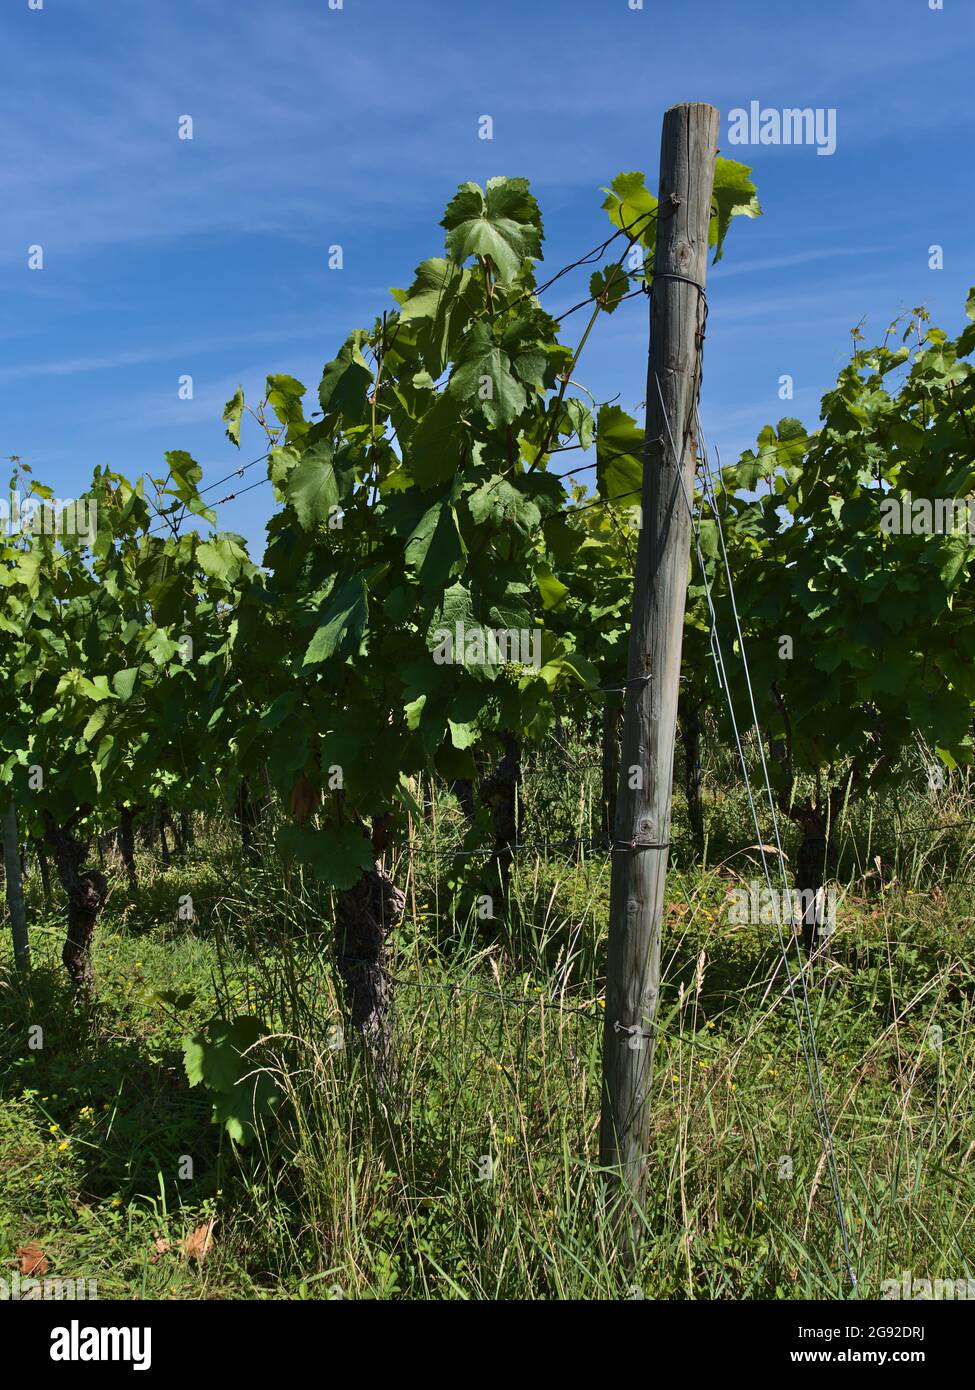 Vineyard with wooden pile and green vine plants (vitis vinifera) with young grapes and grass on sunny day in summer season near Beilstein, Germany. Stock Photo